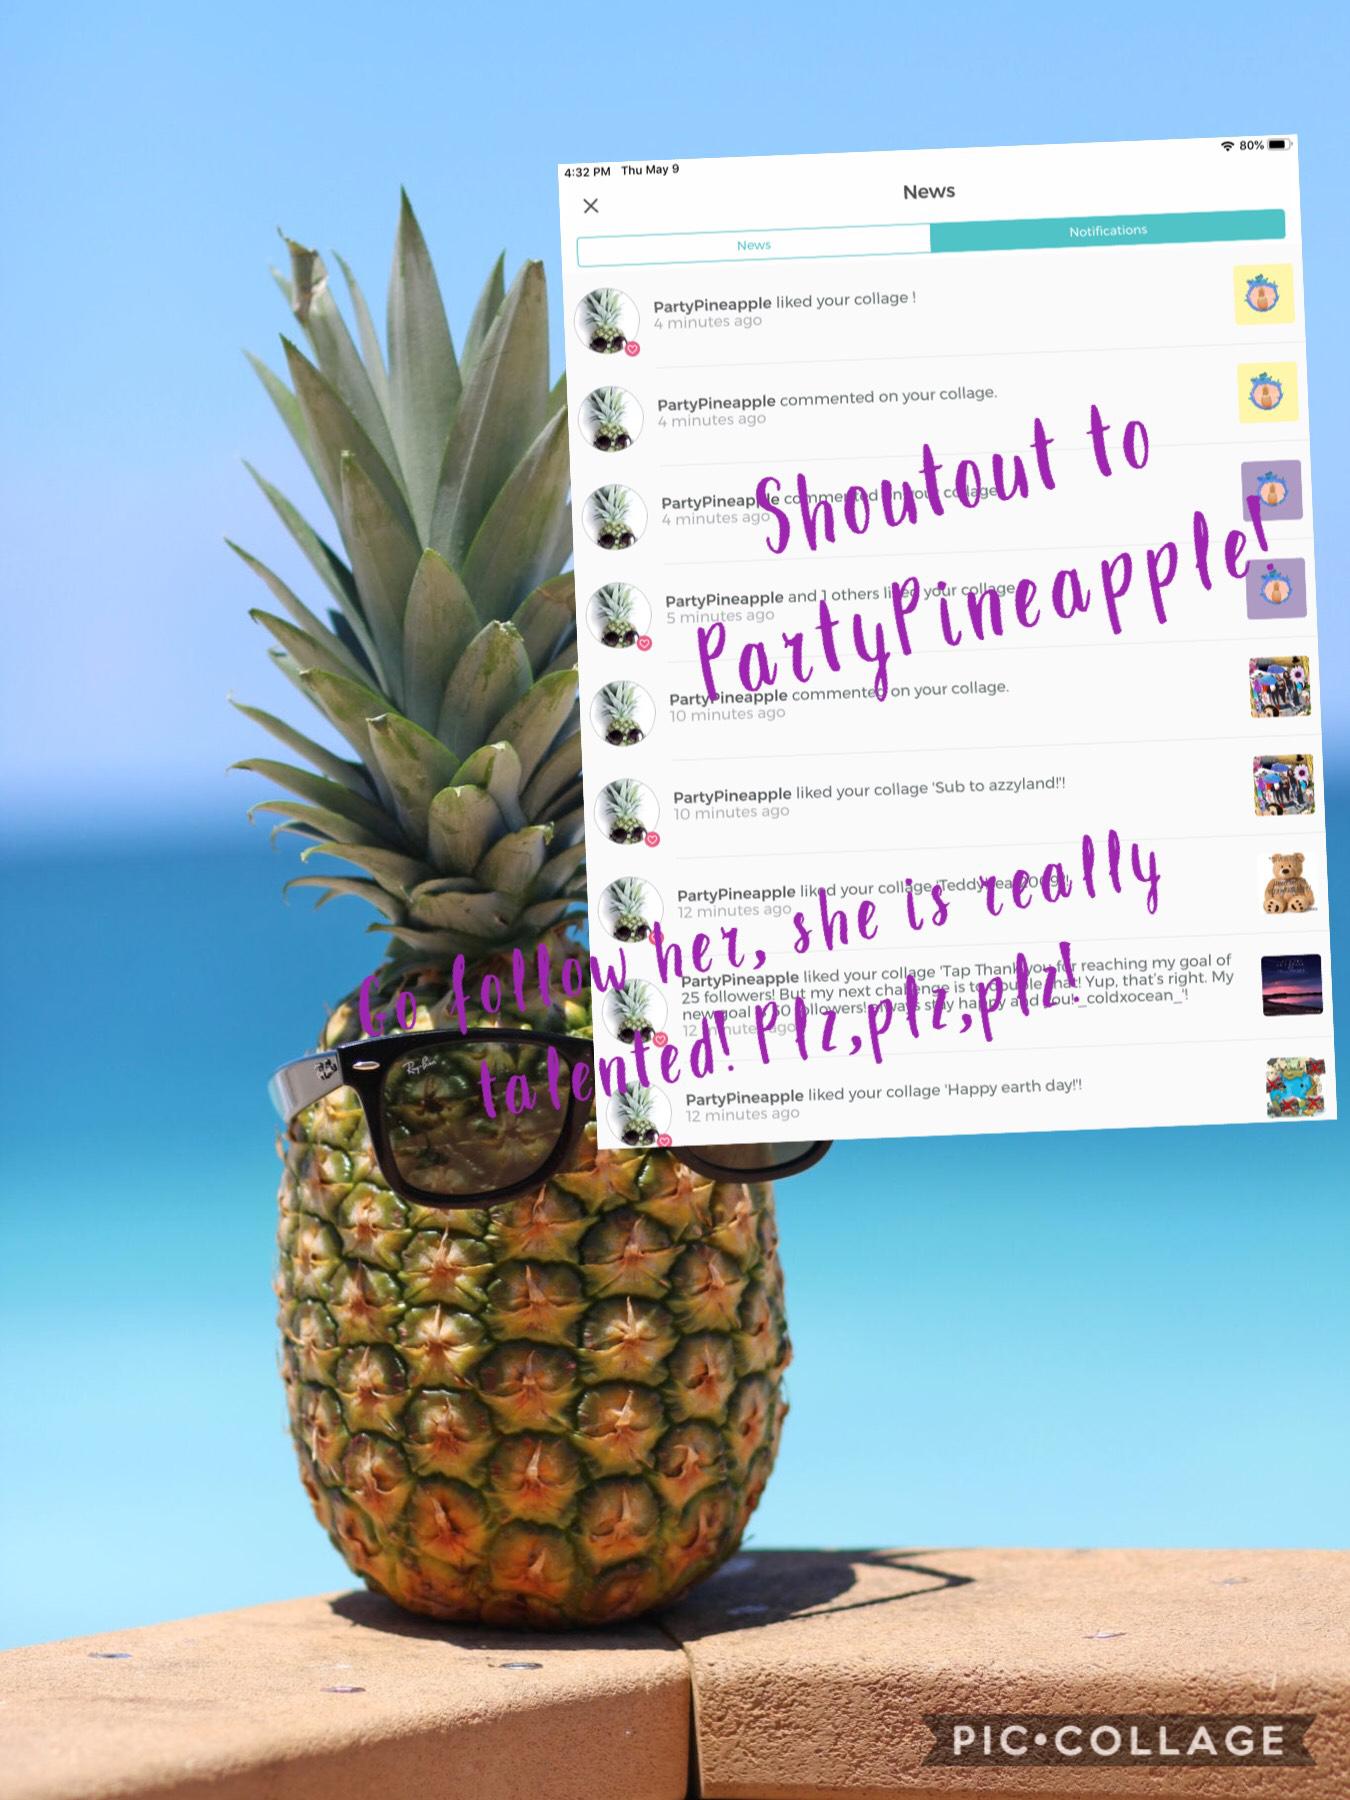 PartyPineapple! Go follow her